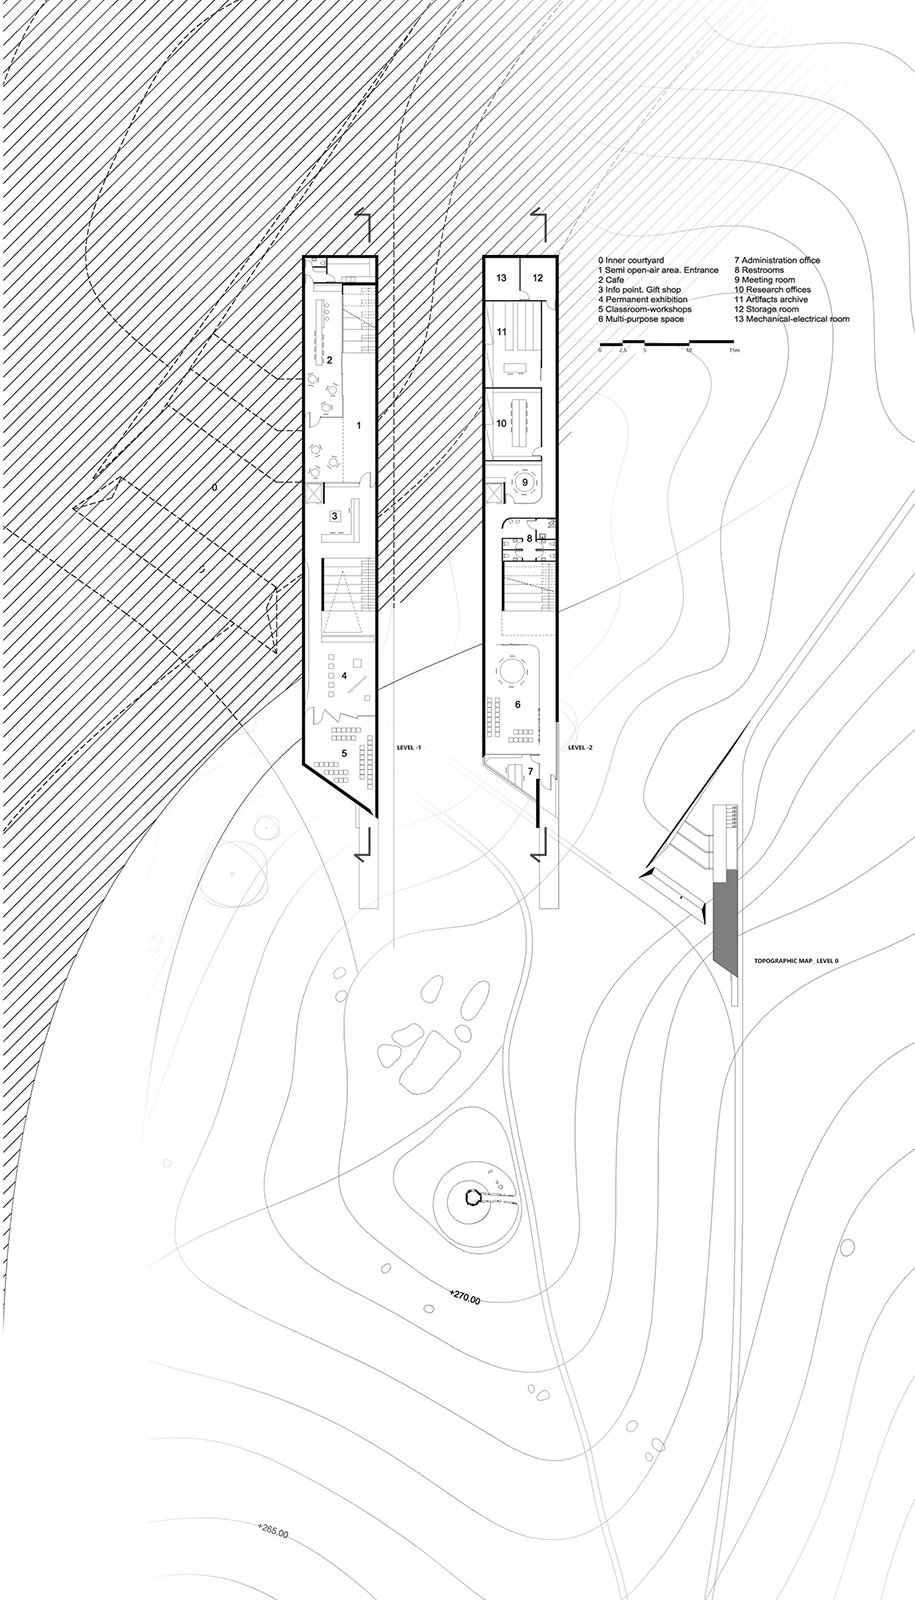 Archisearch Konstantinos Xanthopoulos' entry for SITE CLOISTER international architecture ideas competition by Arkxsite